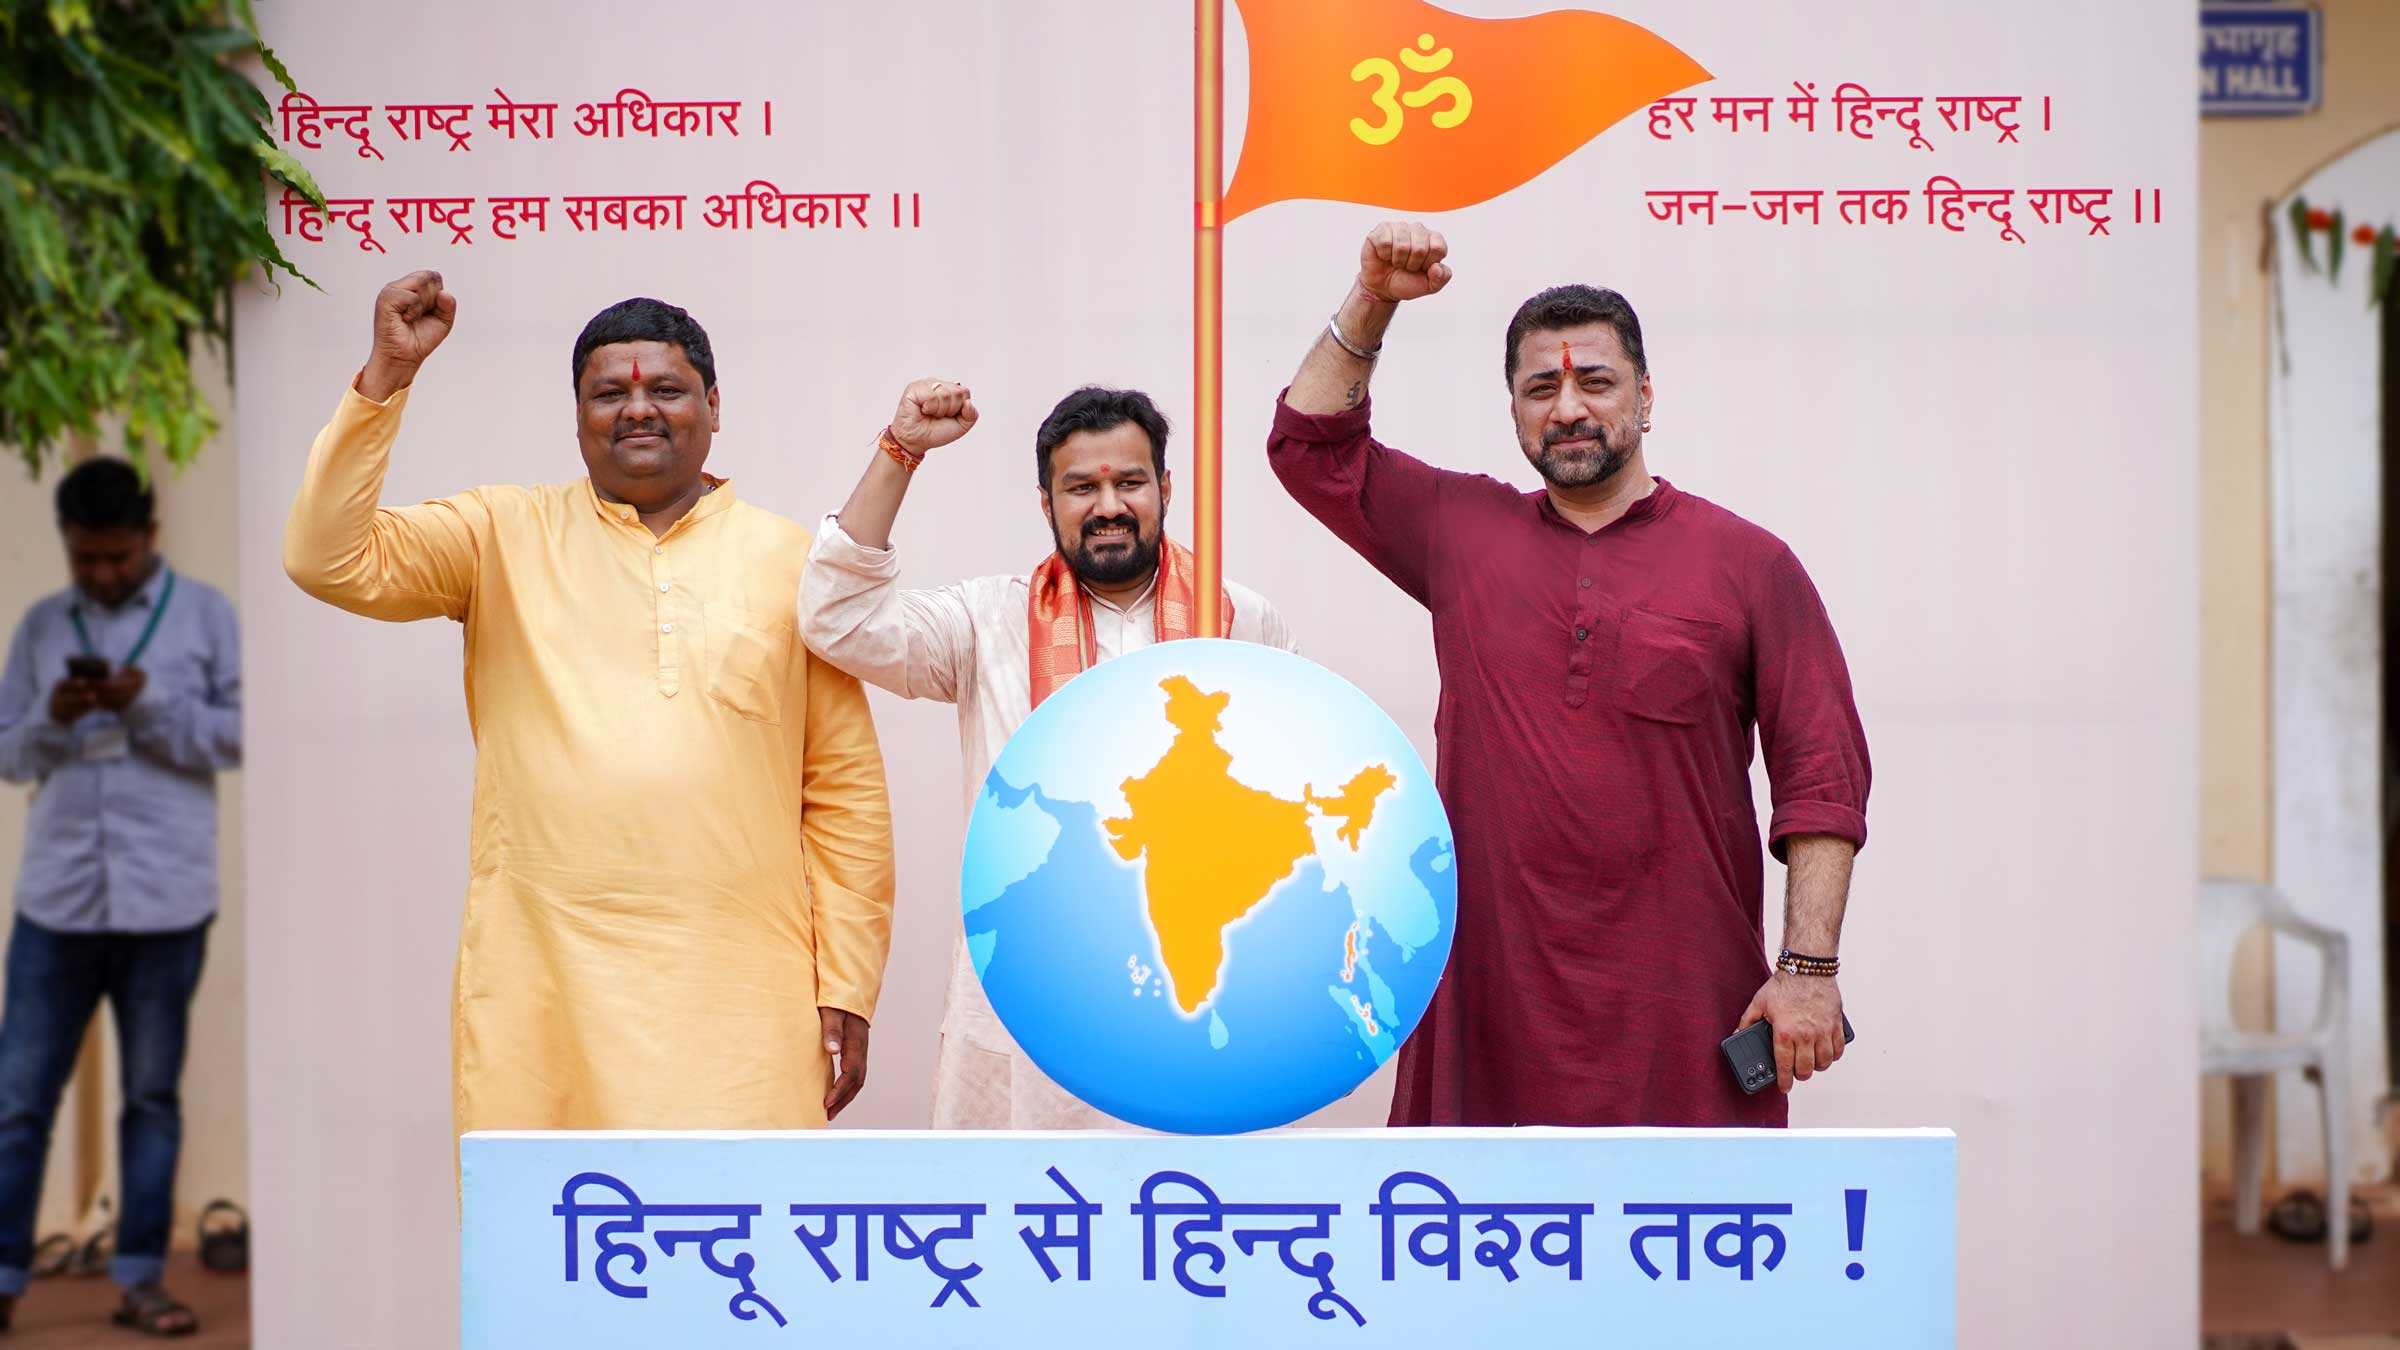 We wholeheartedly support the ‘Hindu Rashtra’; we now dedicate our lives to serving the Nation and Dharma.